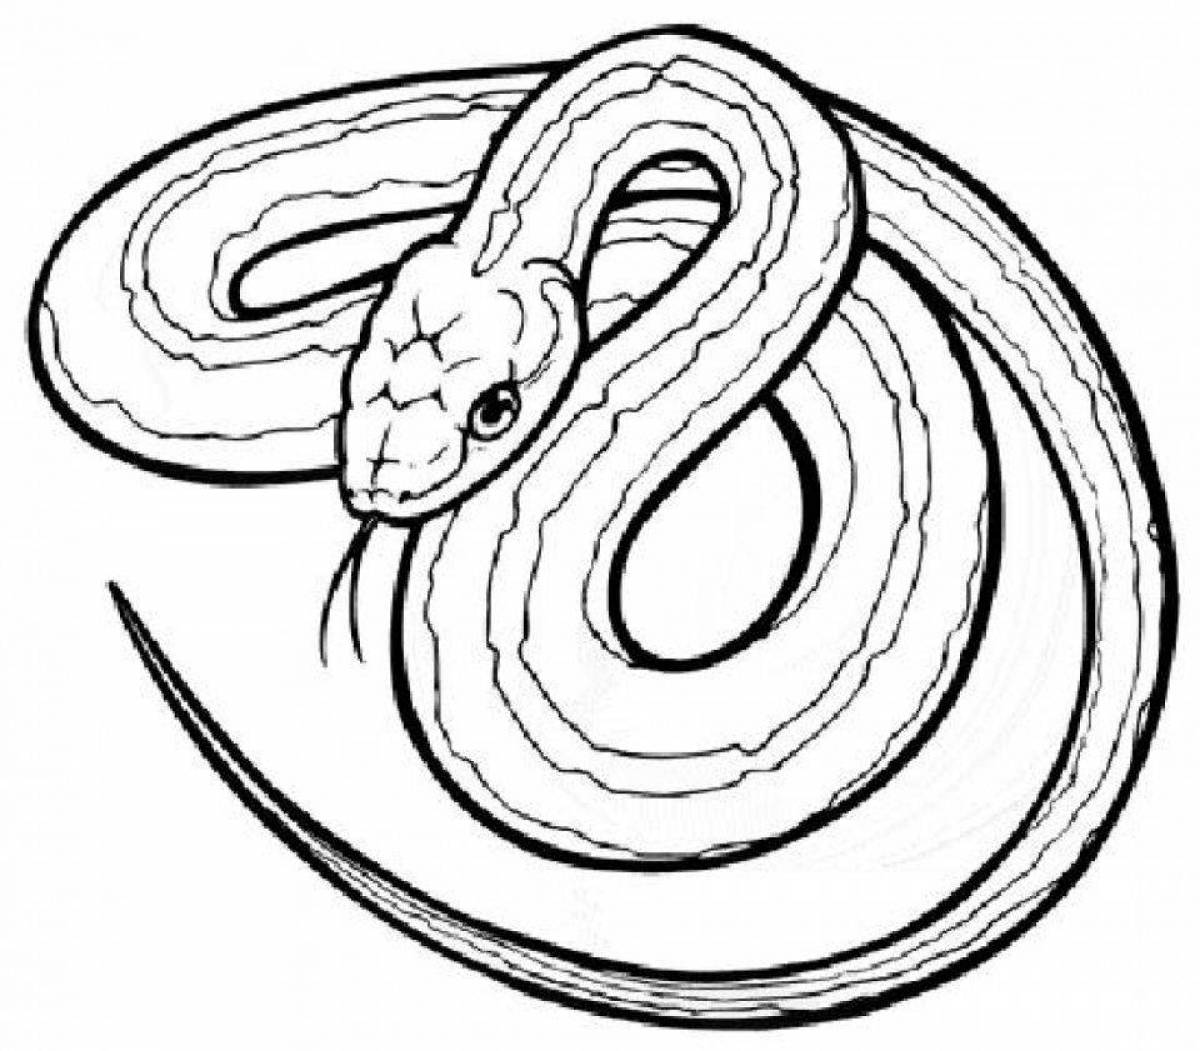 Shiny snake coloring book